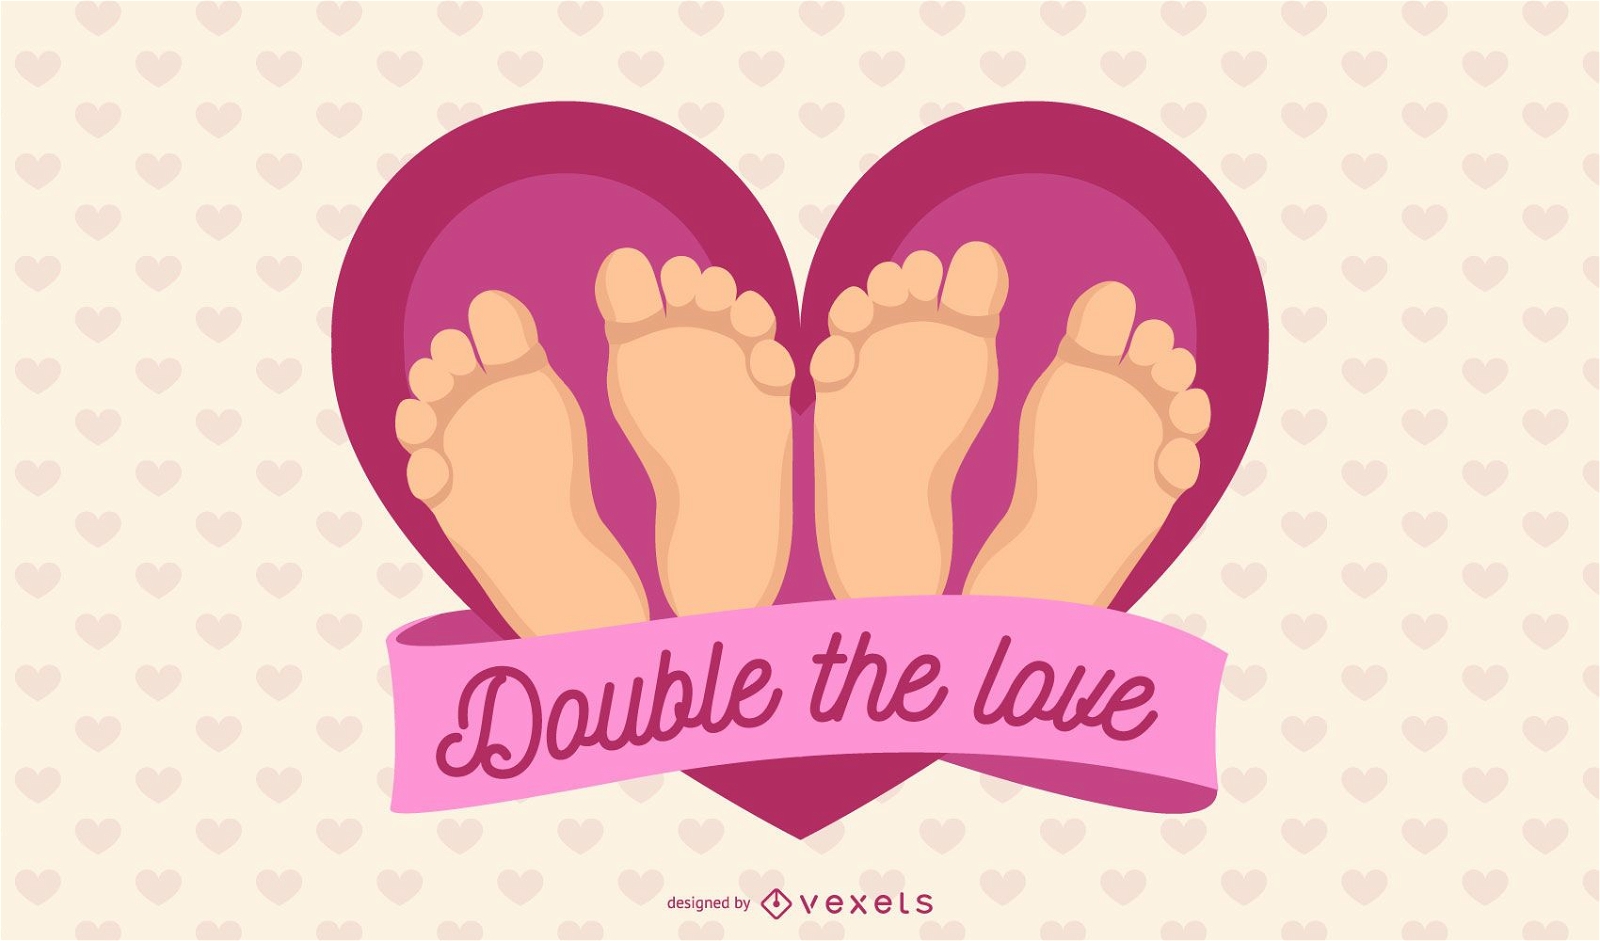 Double the love illustration